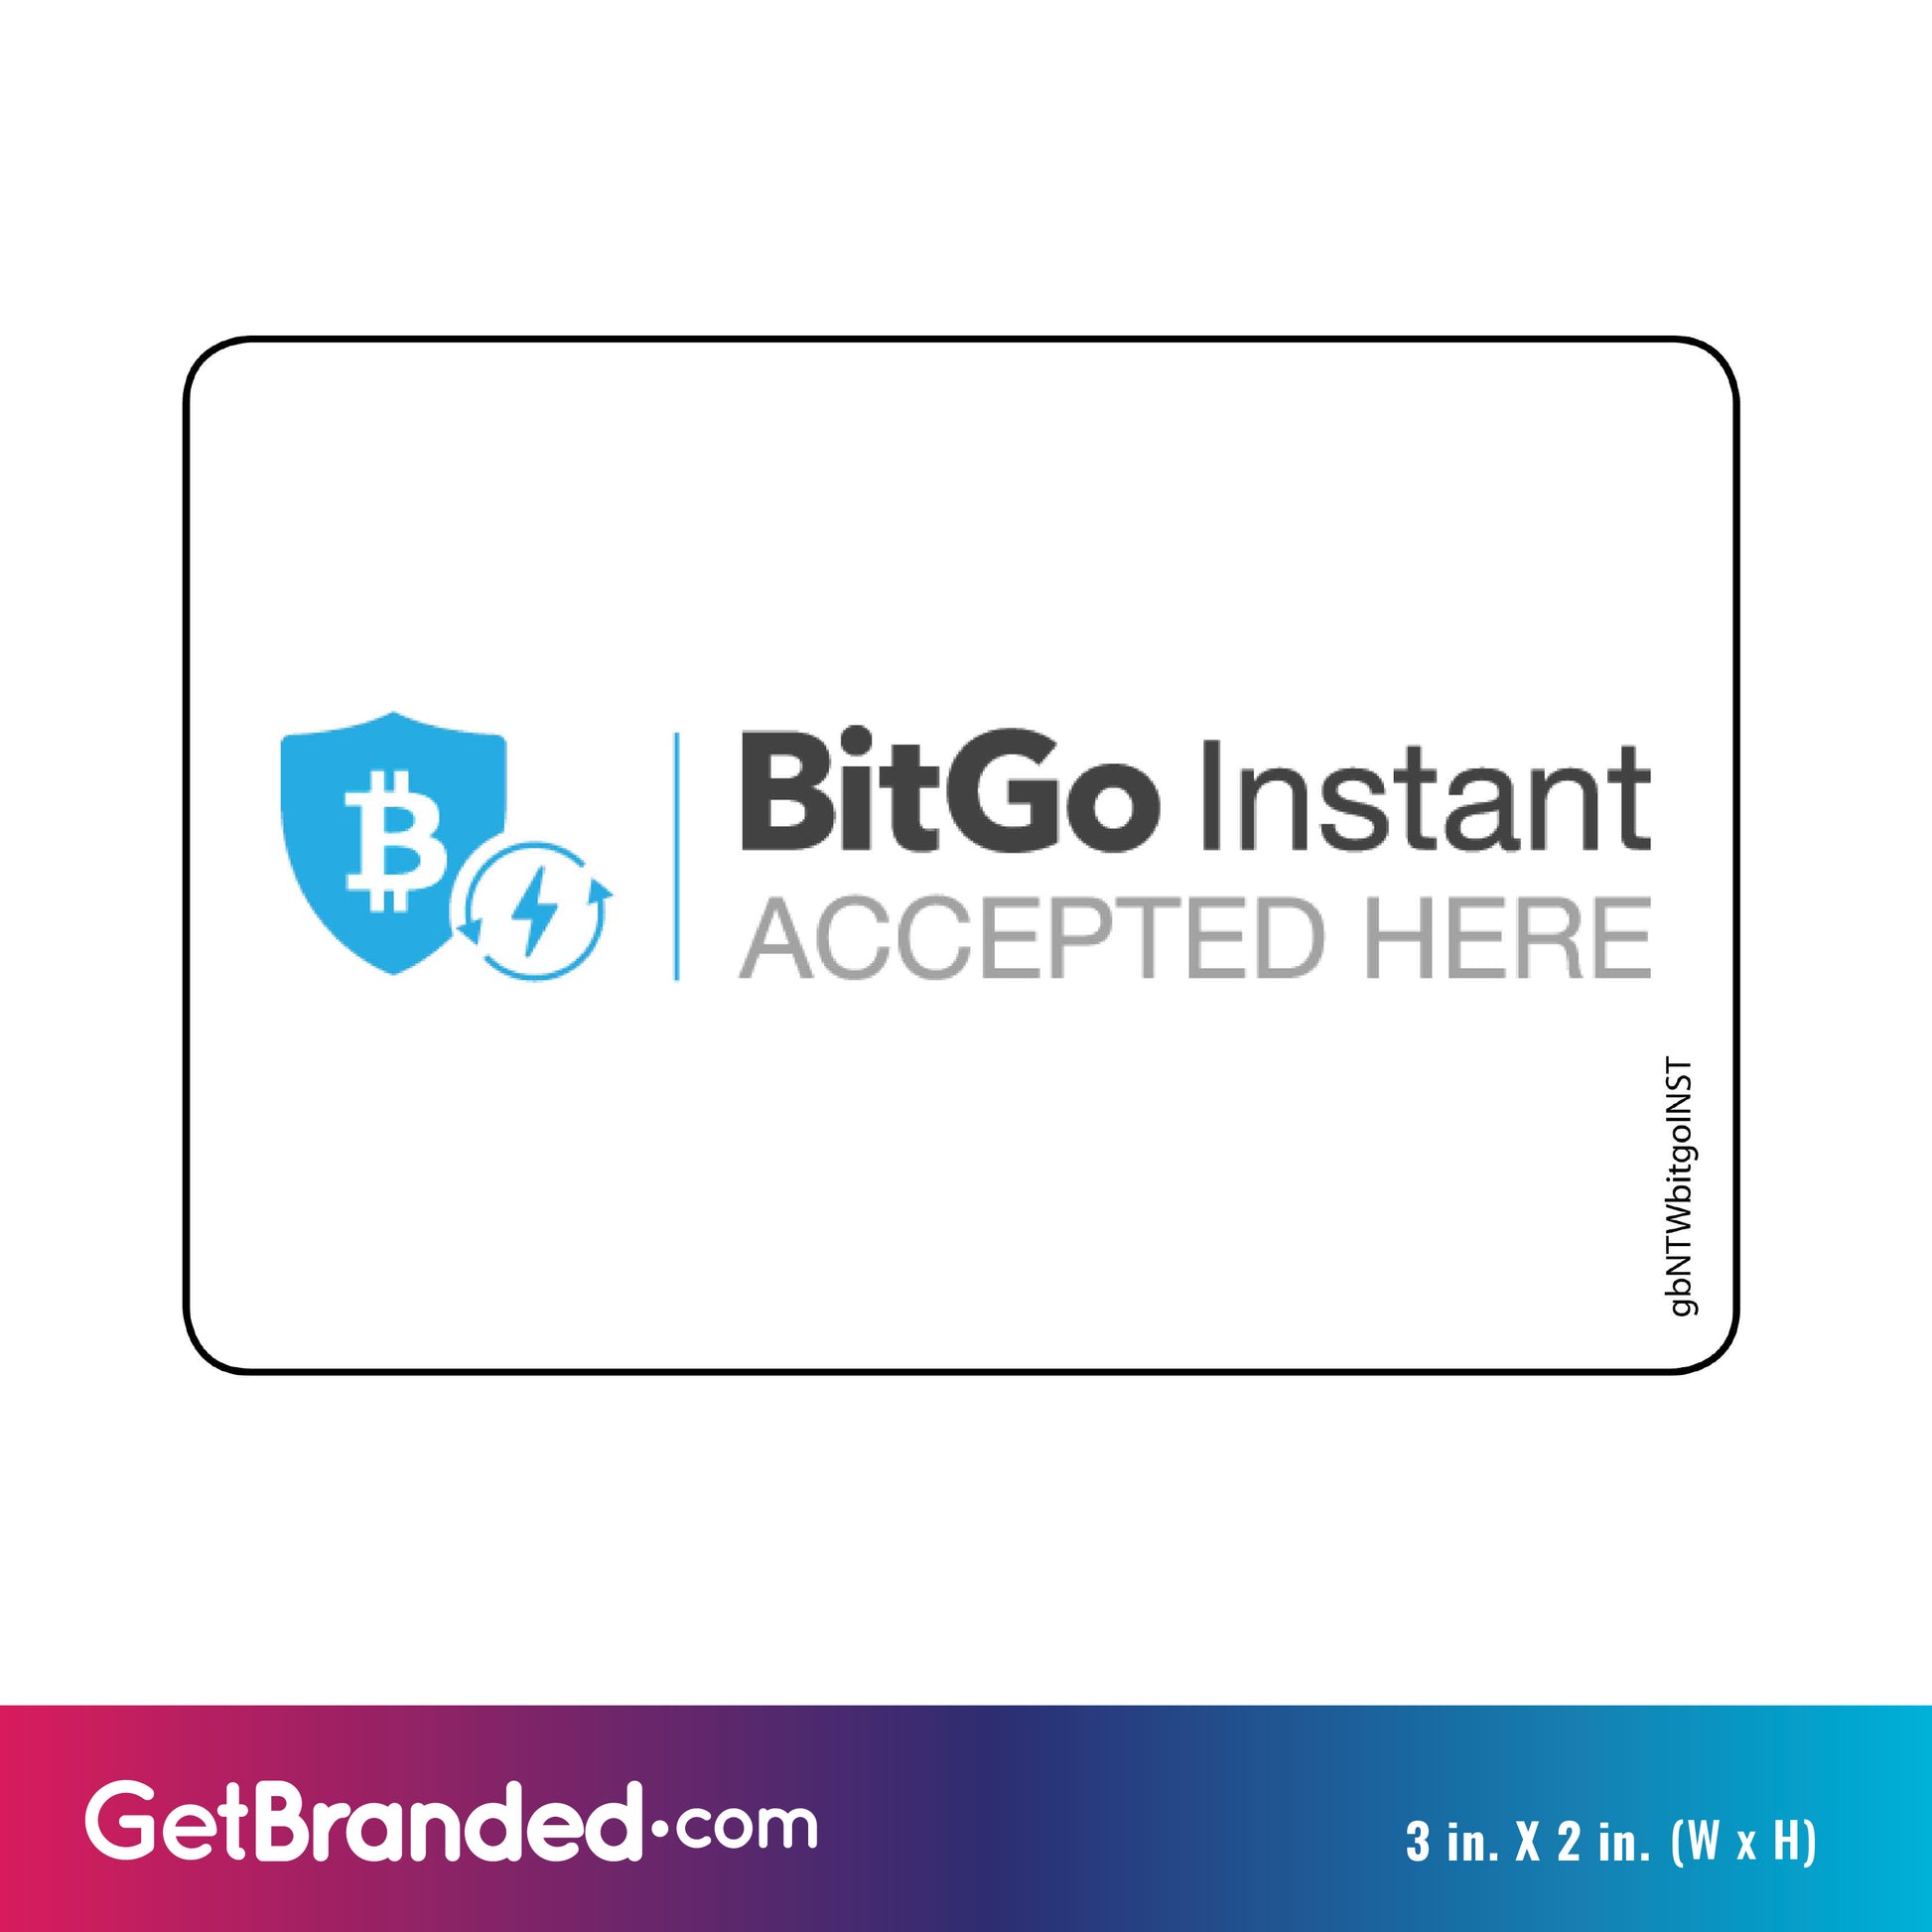 Single Network Decal, BitGo Instant Decal size guide. 3 inches by 2 inches in size.